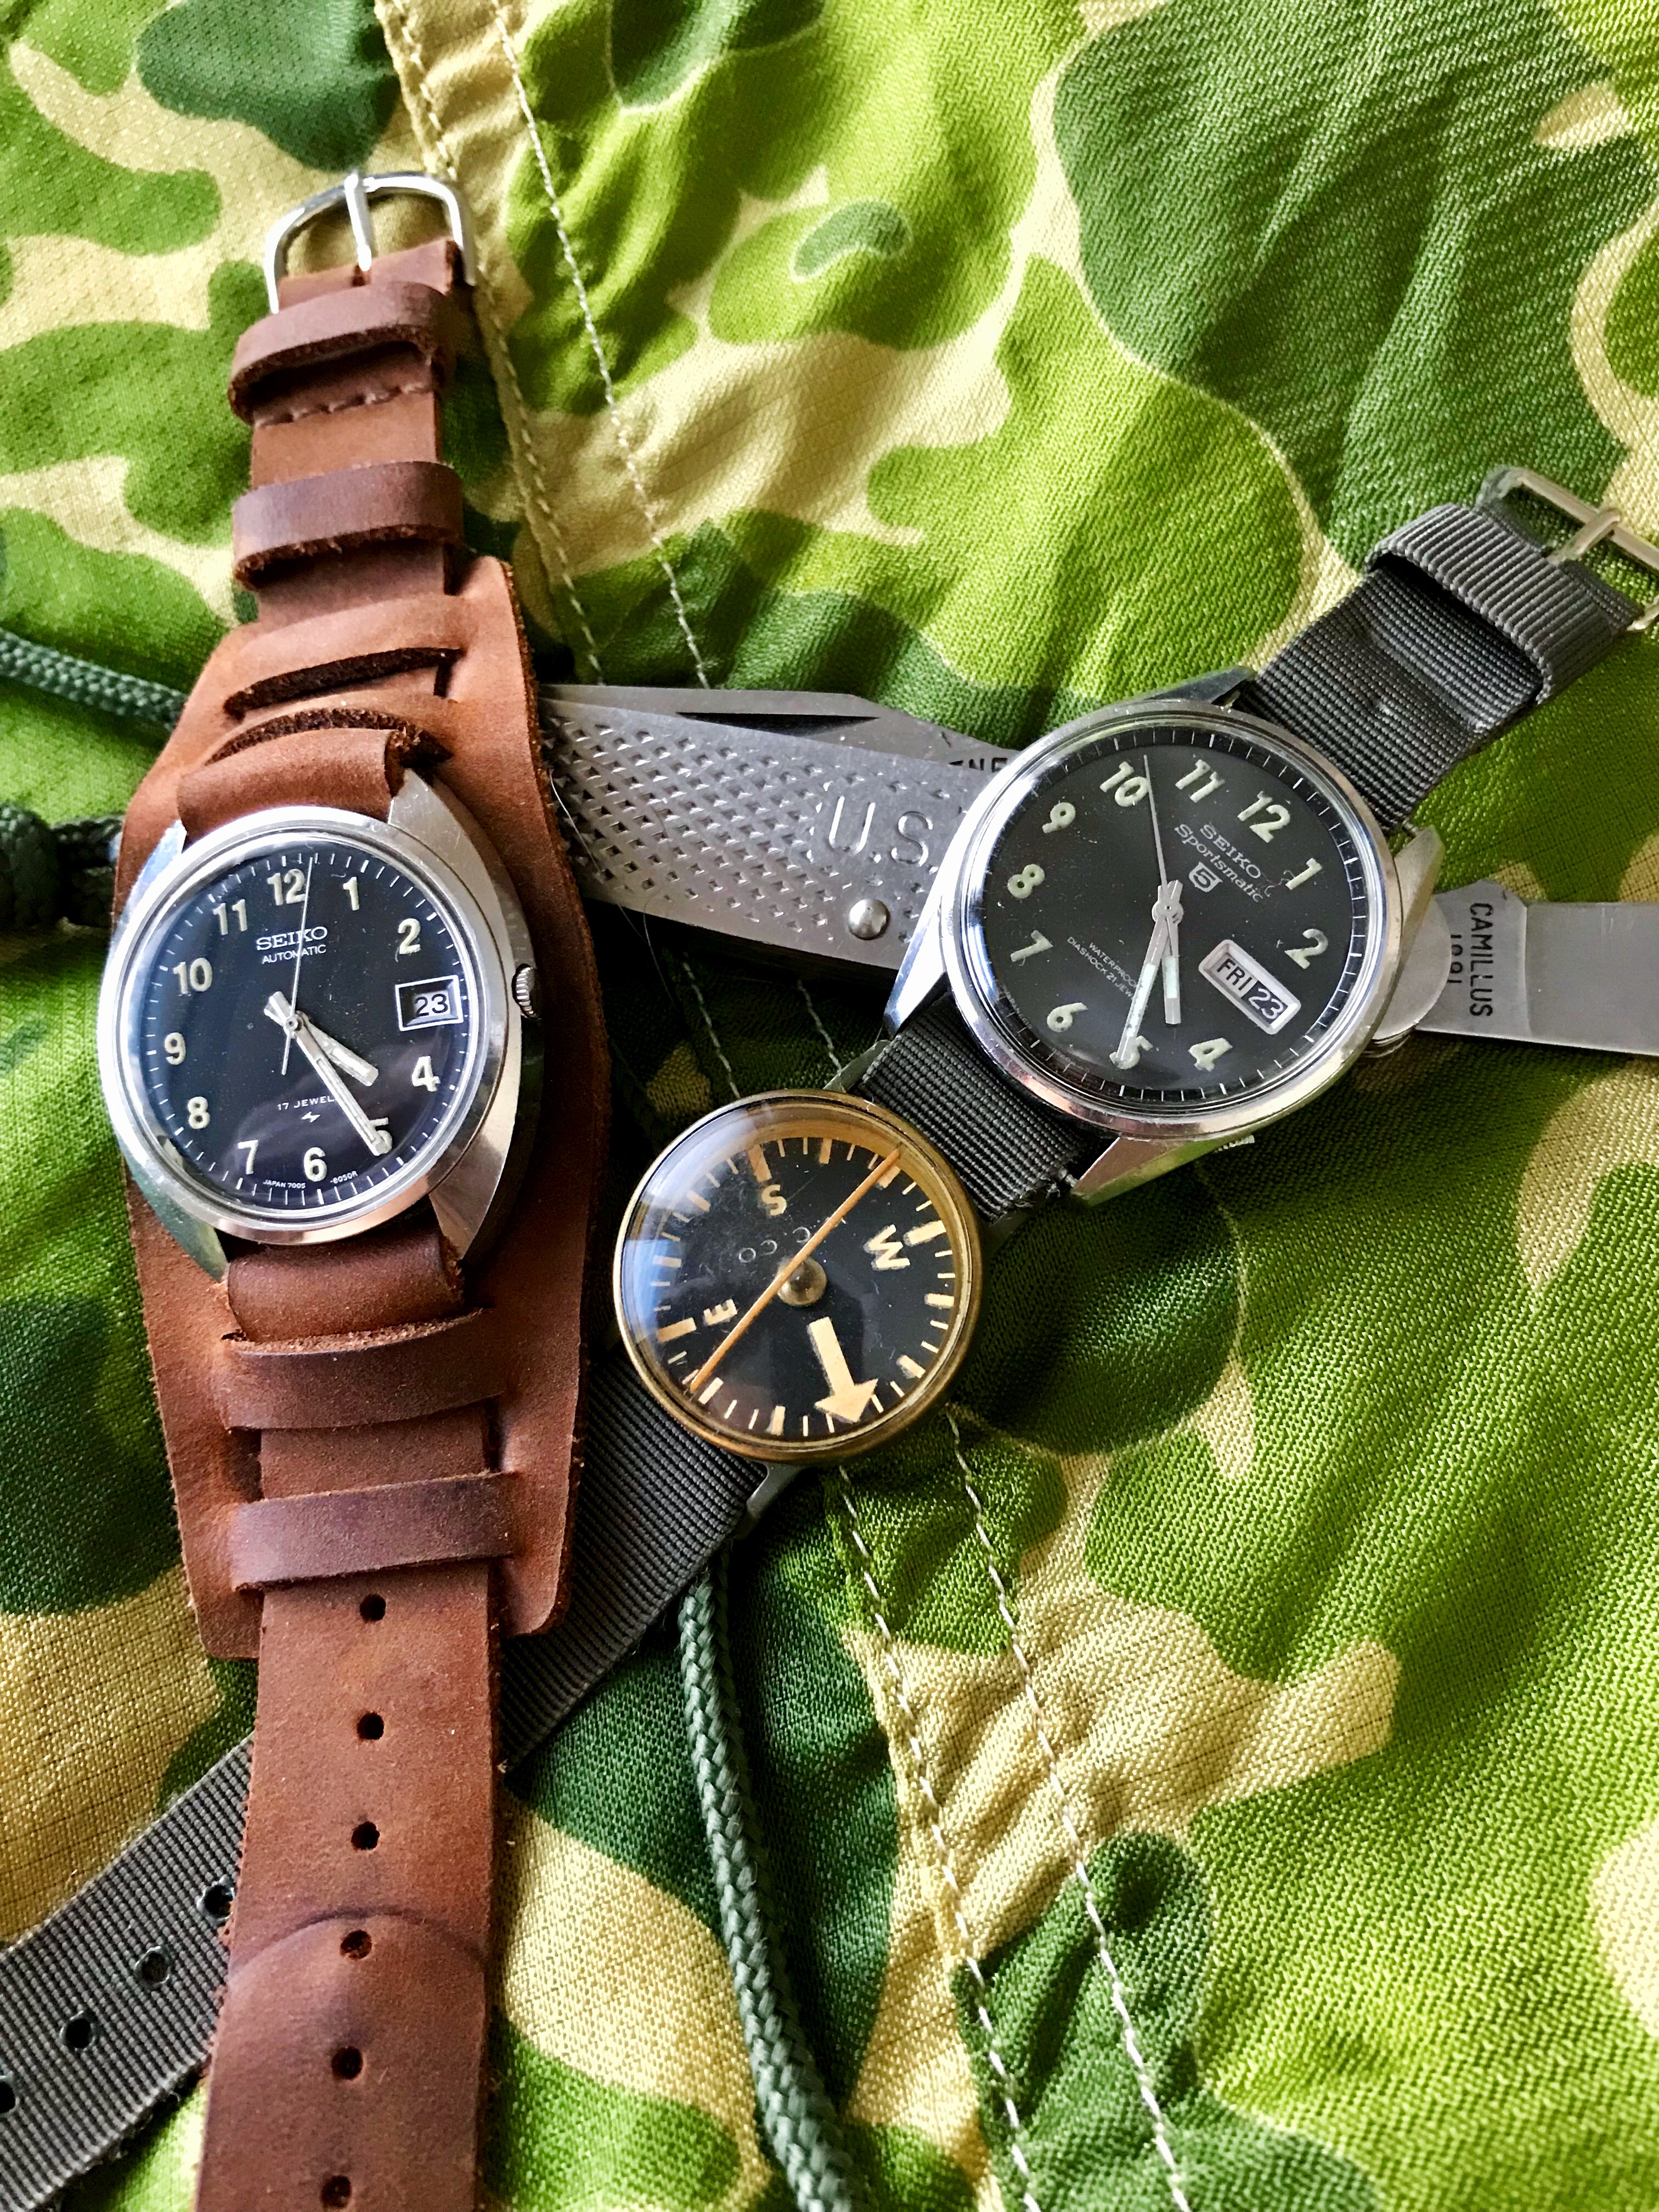 Running Recon and Vintage Seiko's – Just 2 Ticks